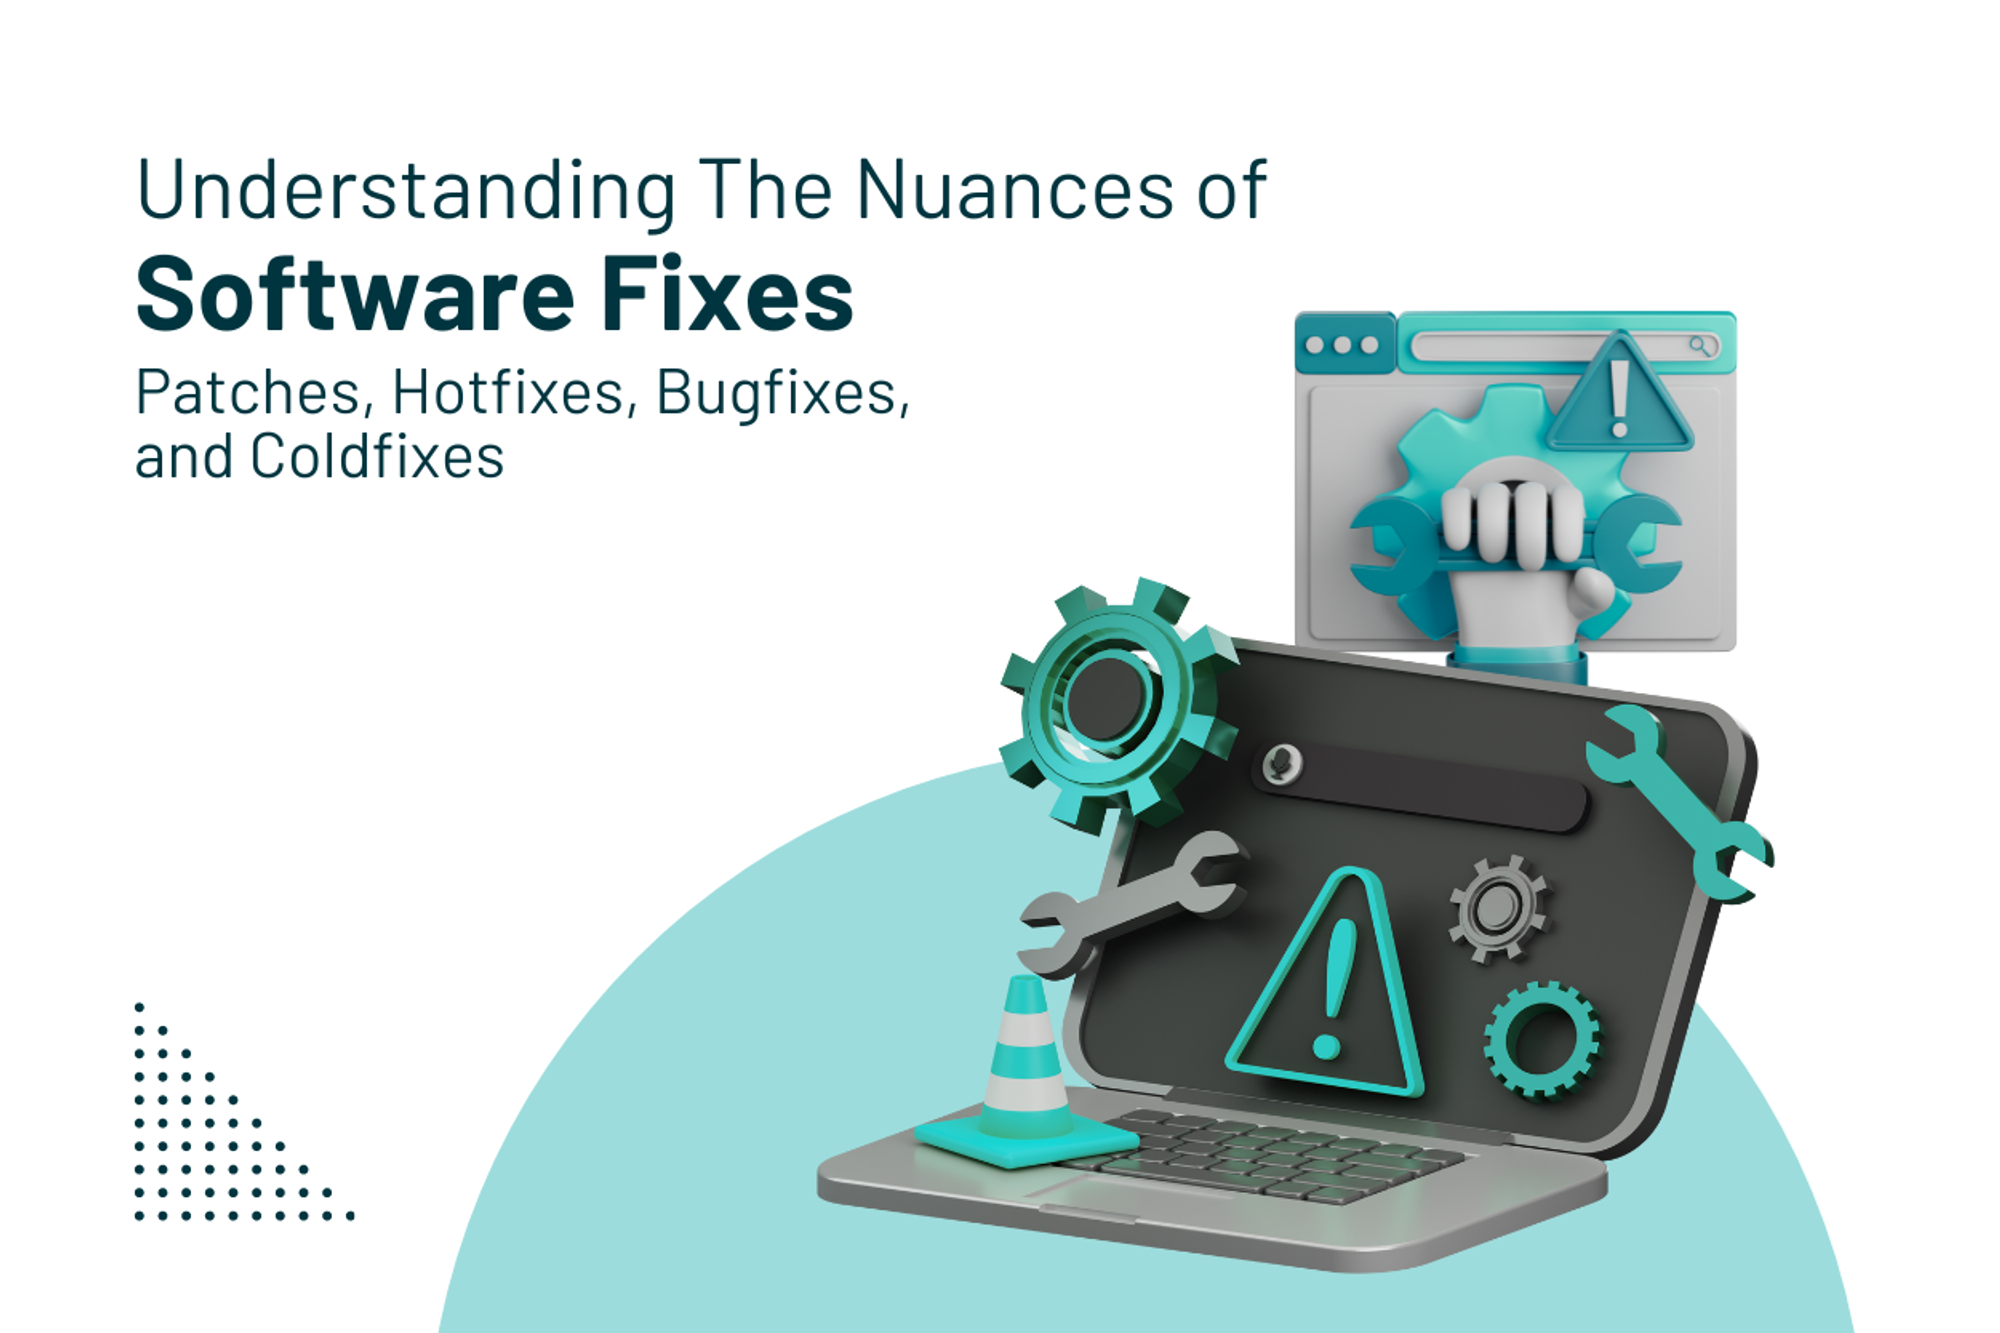 Understanding the Nuances of Software Fixes: Patches, Hotfixes, Bugfixes, and Coldfixes